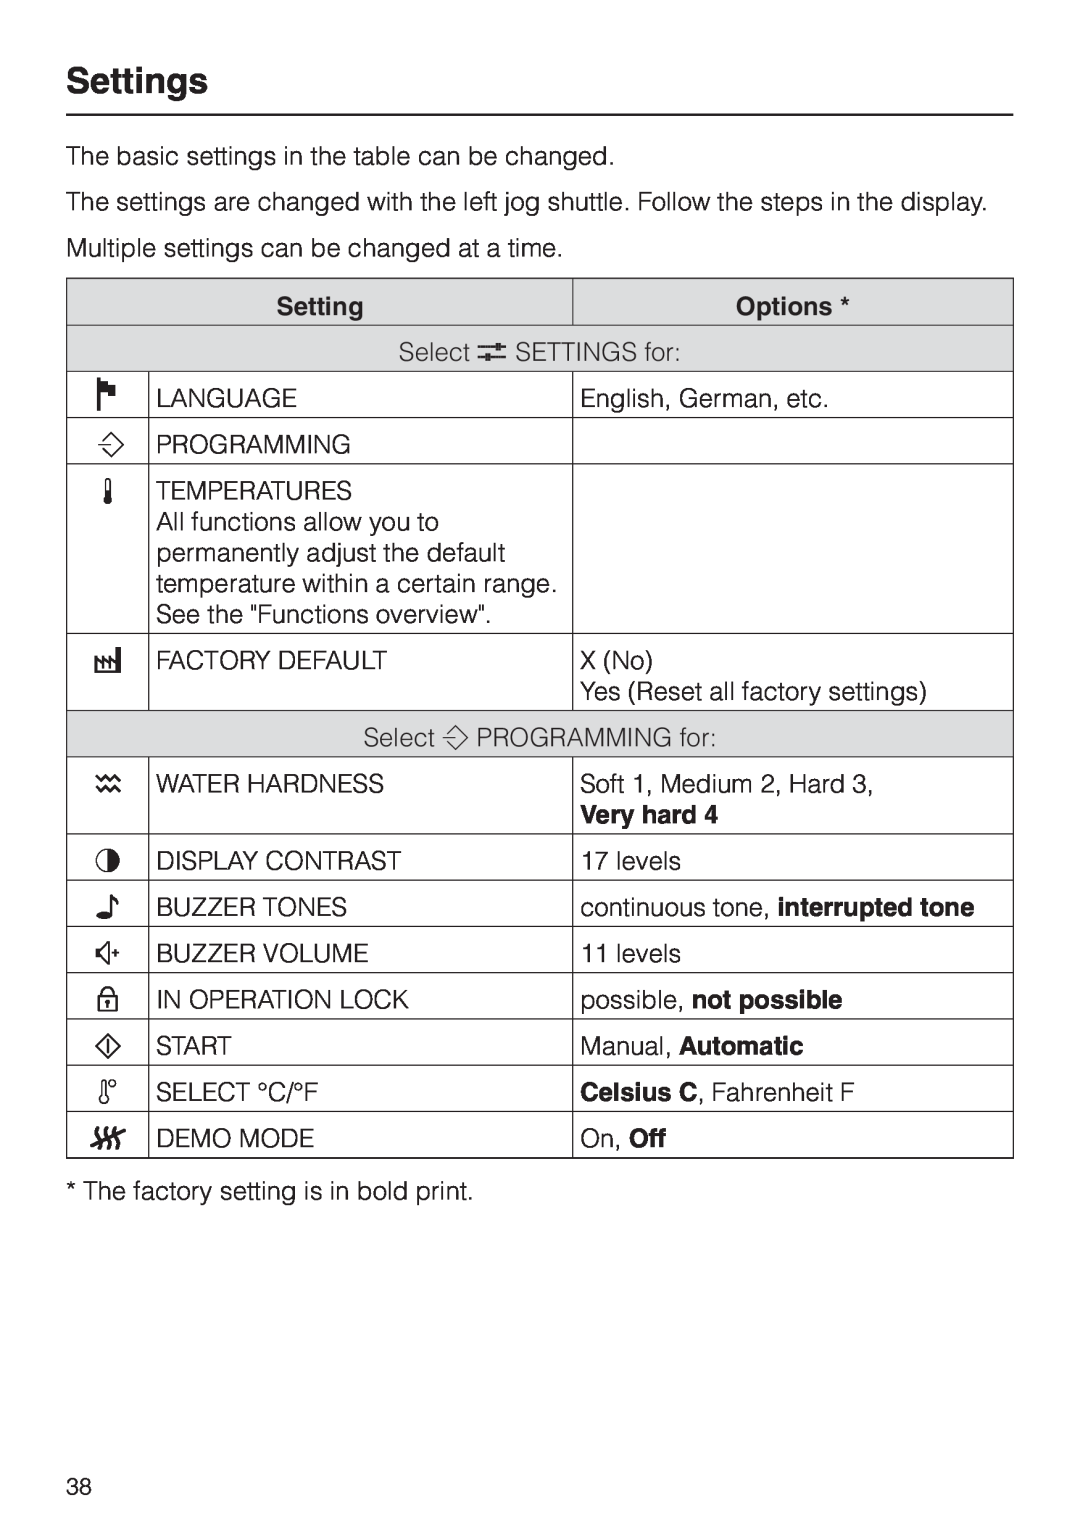 Miele DG 2661 installation instructions Settings, Options, Very hard, possible, not possible, Manual, Automatic 